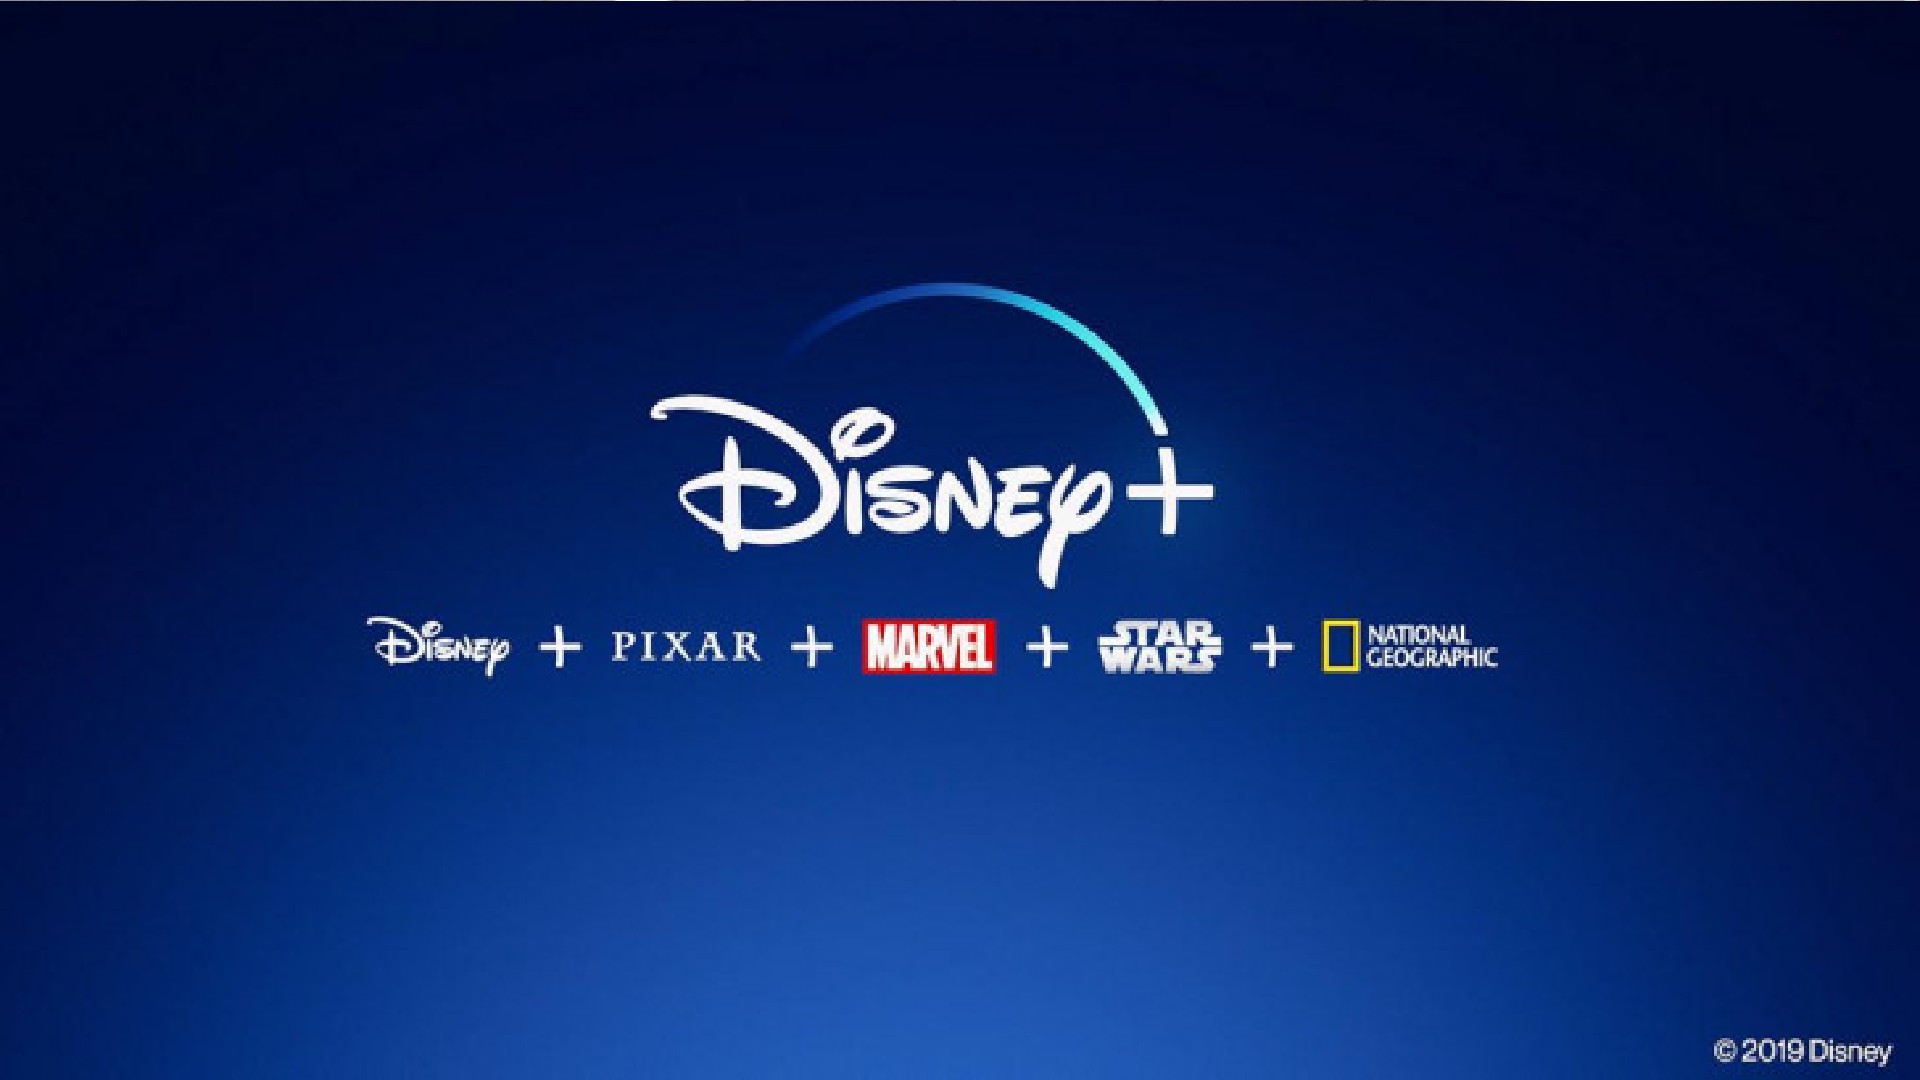 Have You Tried Disney+ Yet? Here’s How You Can Get Up To Six Months Of Free